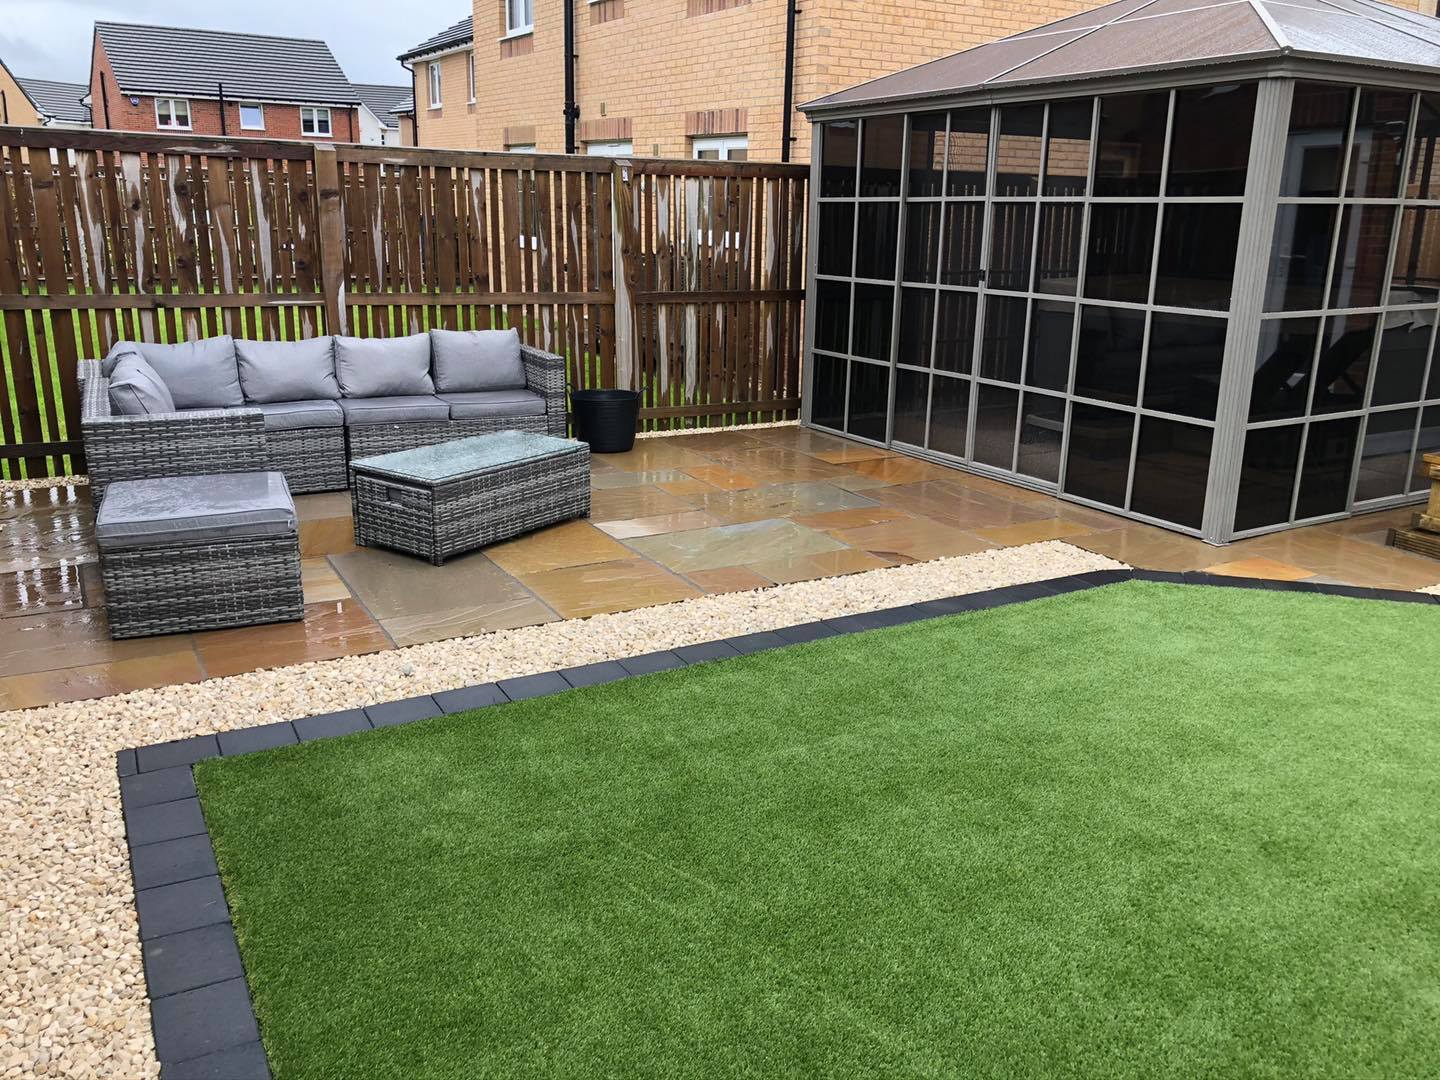 New patio and lawn Glasgow